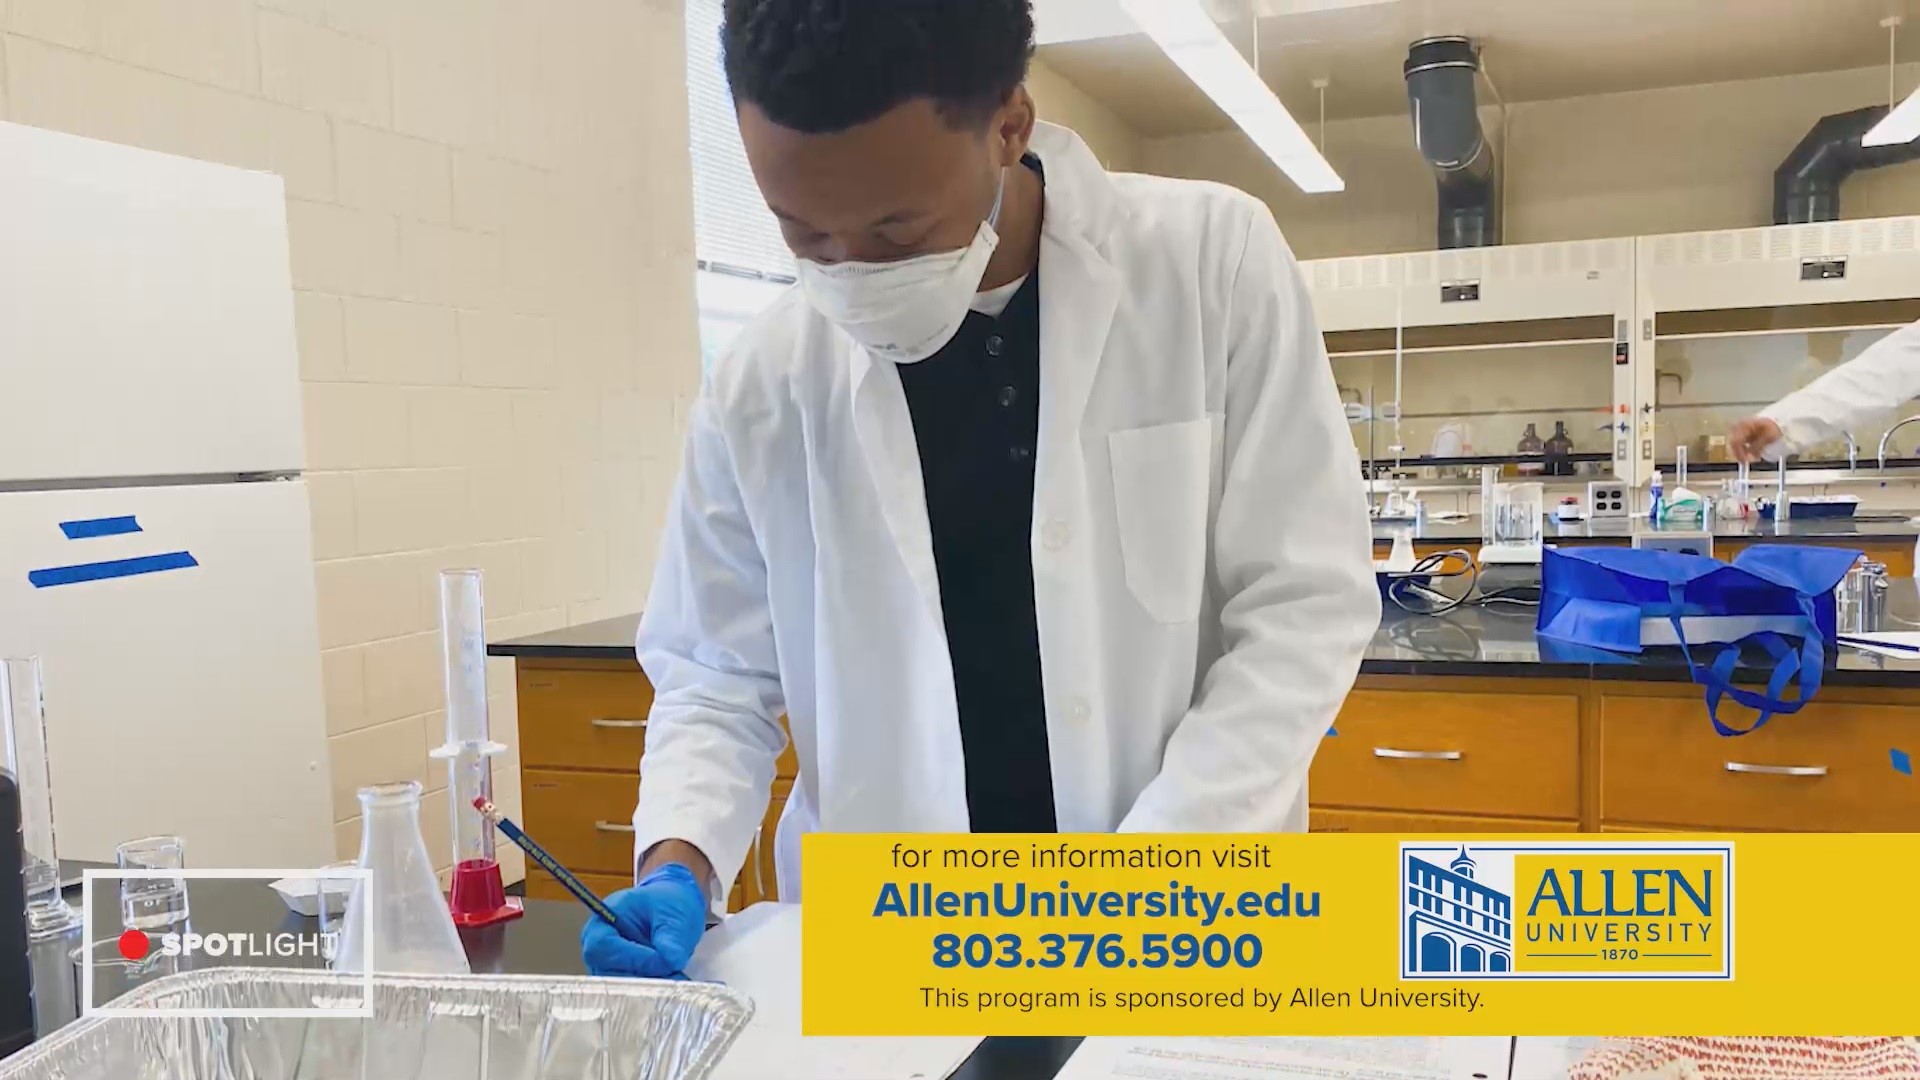 We sit down with Allen University's President, Dr. Ernest McNealey to discuss the impactful culture shift happening at Allen.